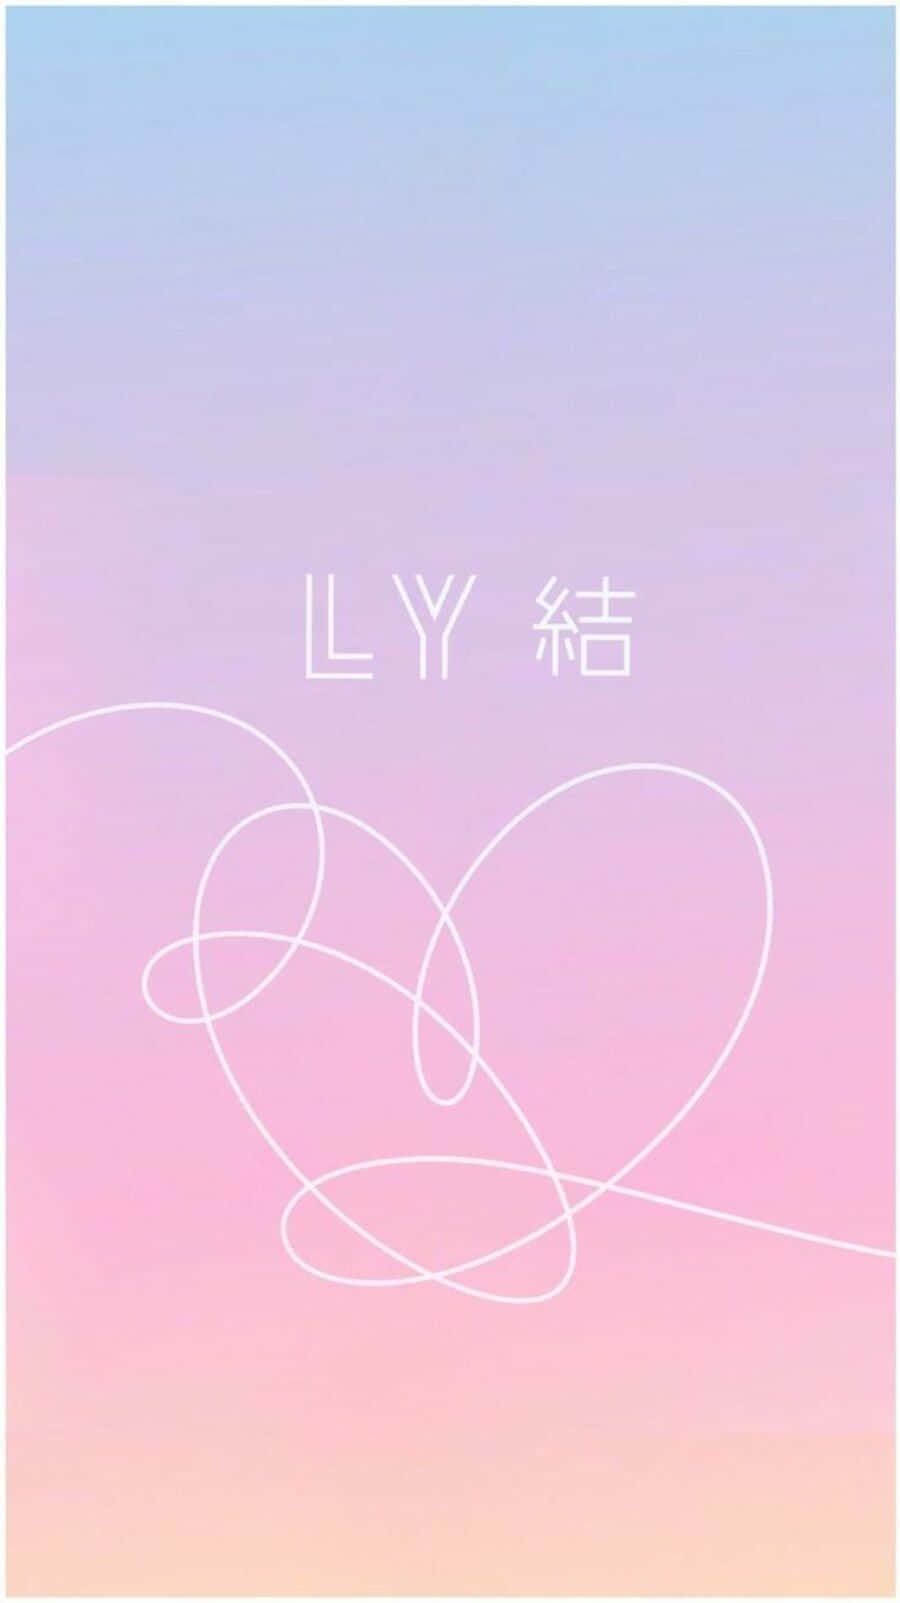 Embrace Self-Love with BTS Love Yourself Wallpaper Wallpaper